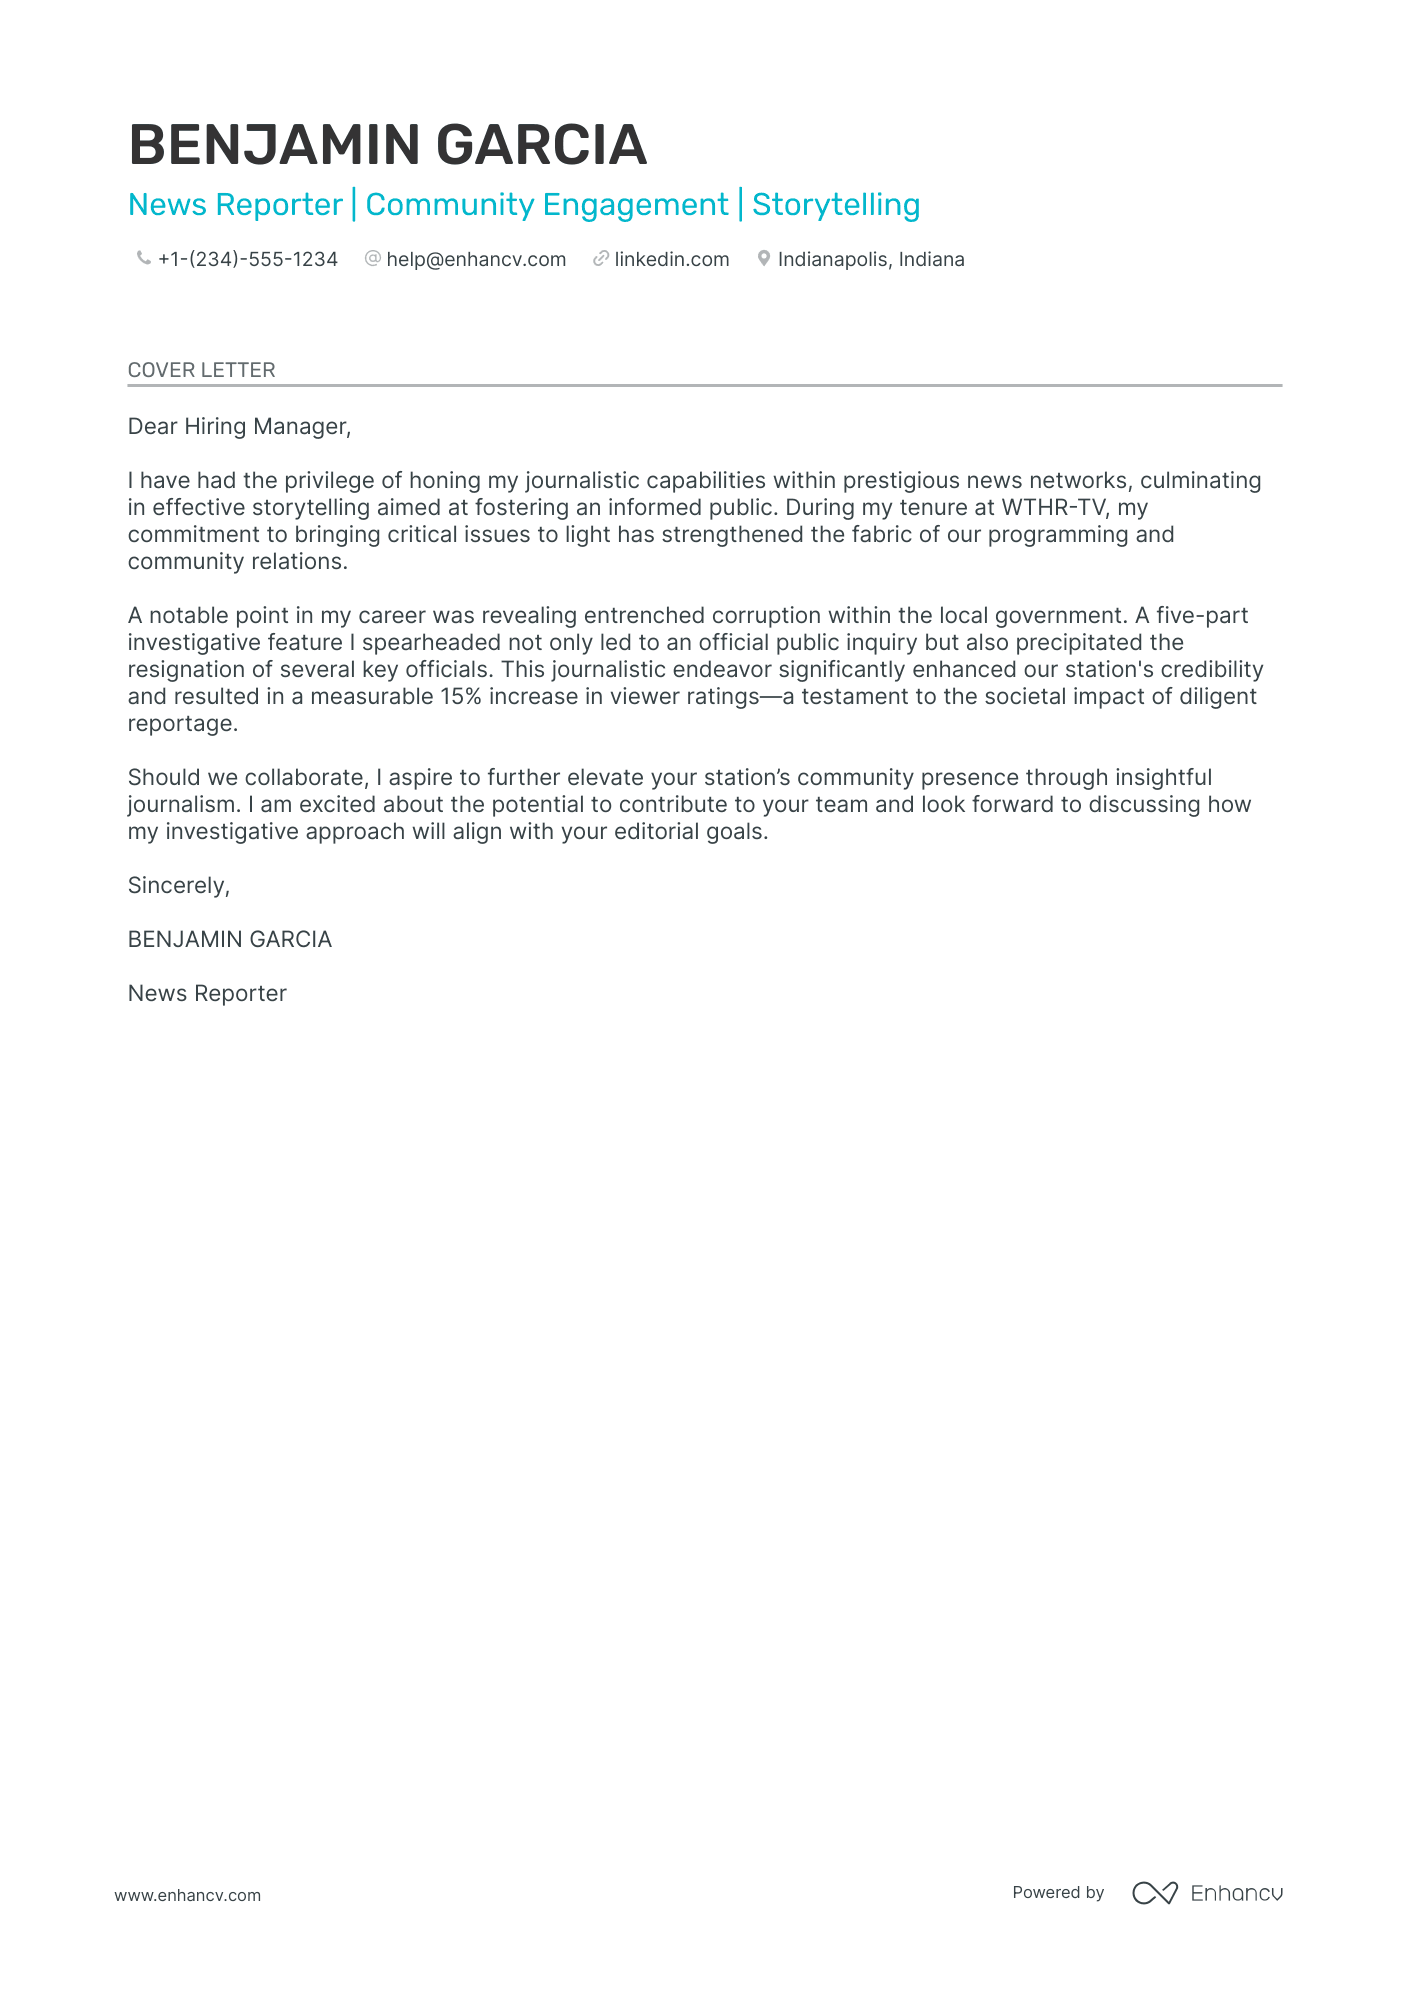 application letter as a journalist